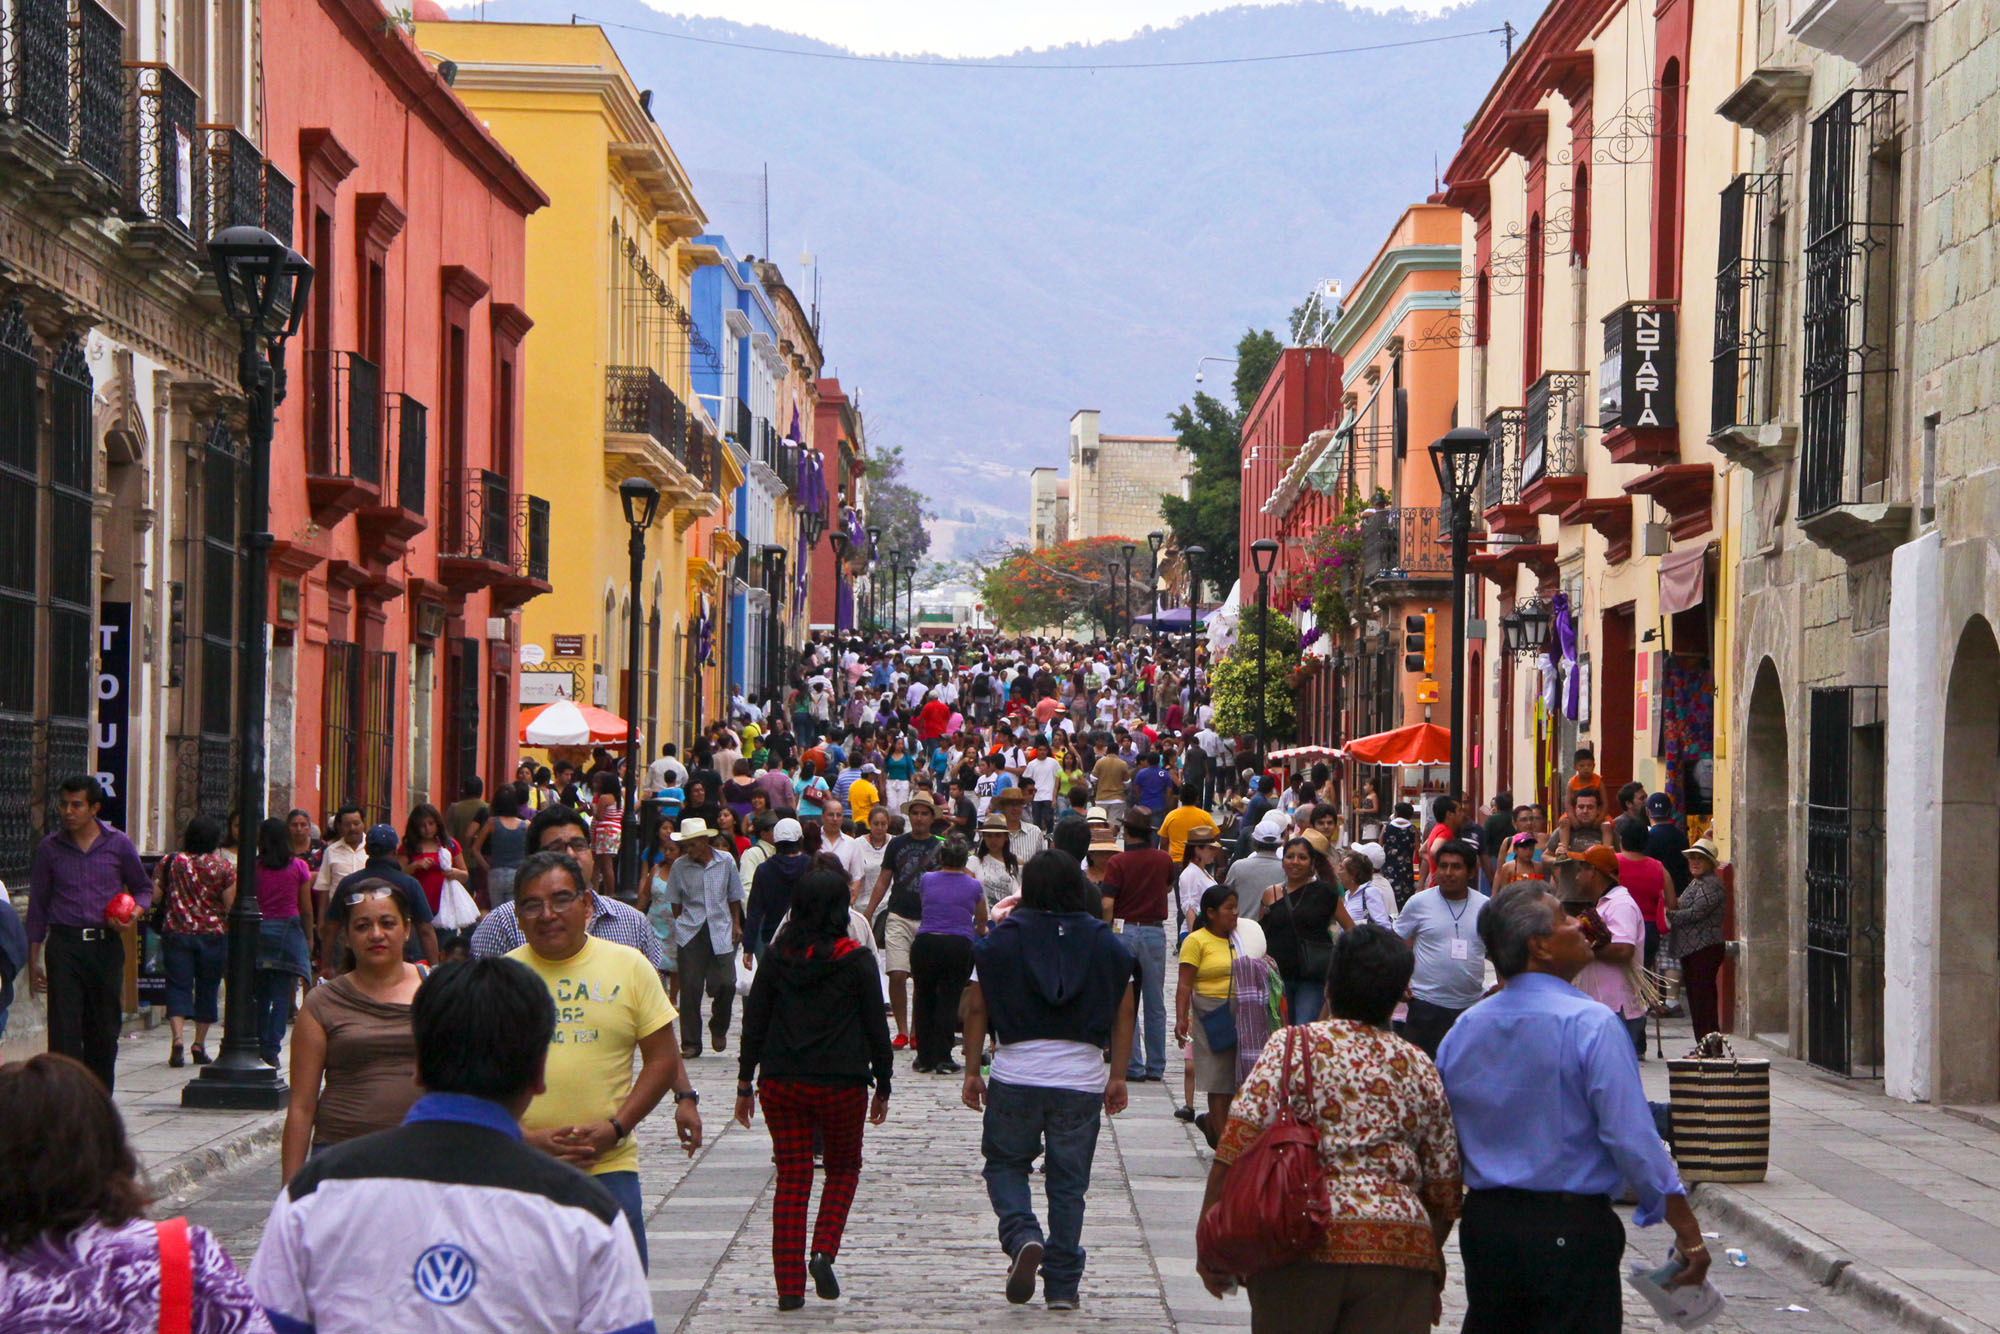 Mexican touristic sector registers a US$20.7 billion loss due to the Coronavirus contingency